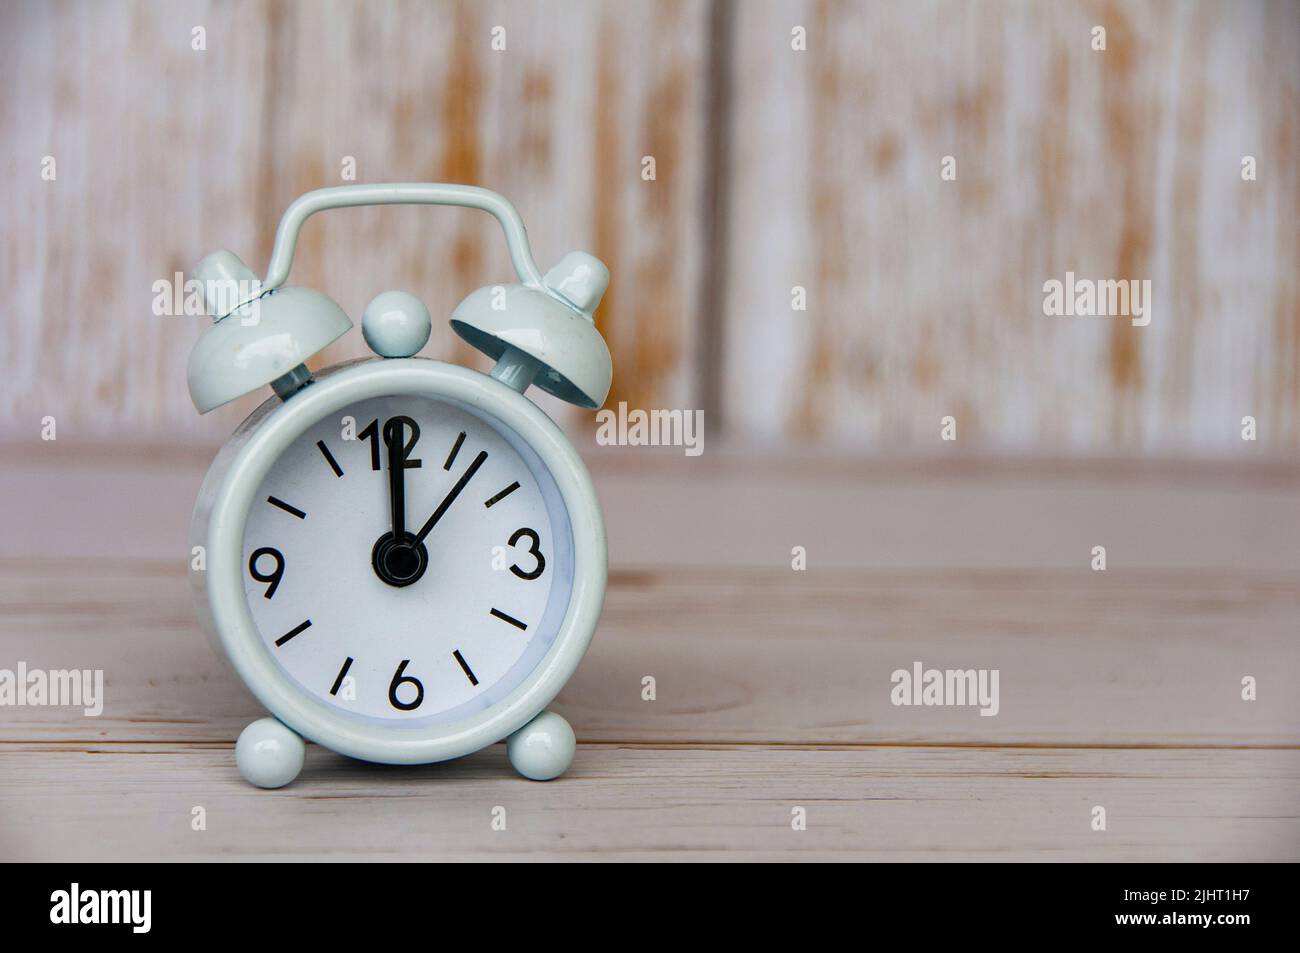 12am 12pm Clock On Wooden Table Stock Photo 611748464